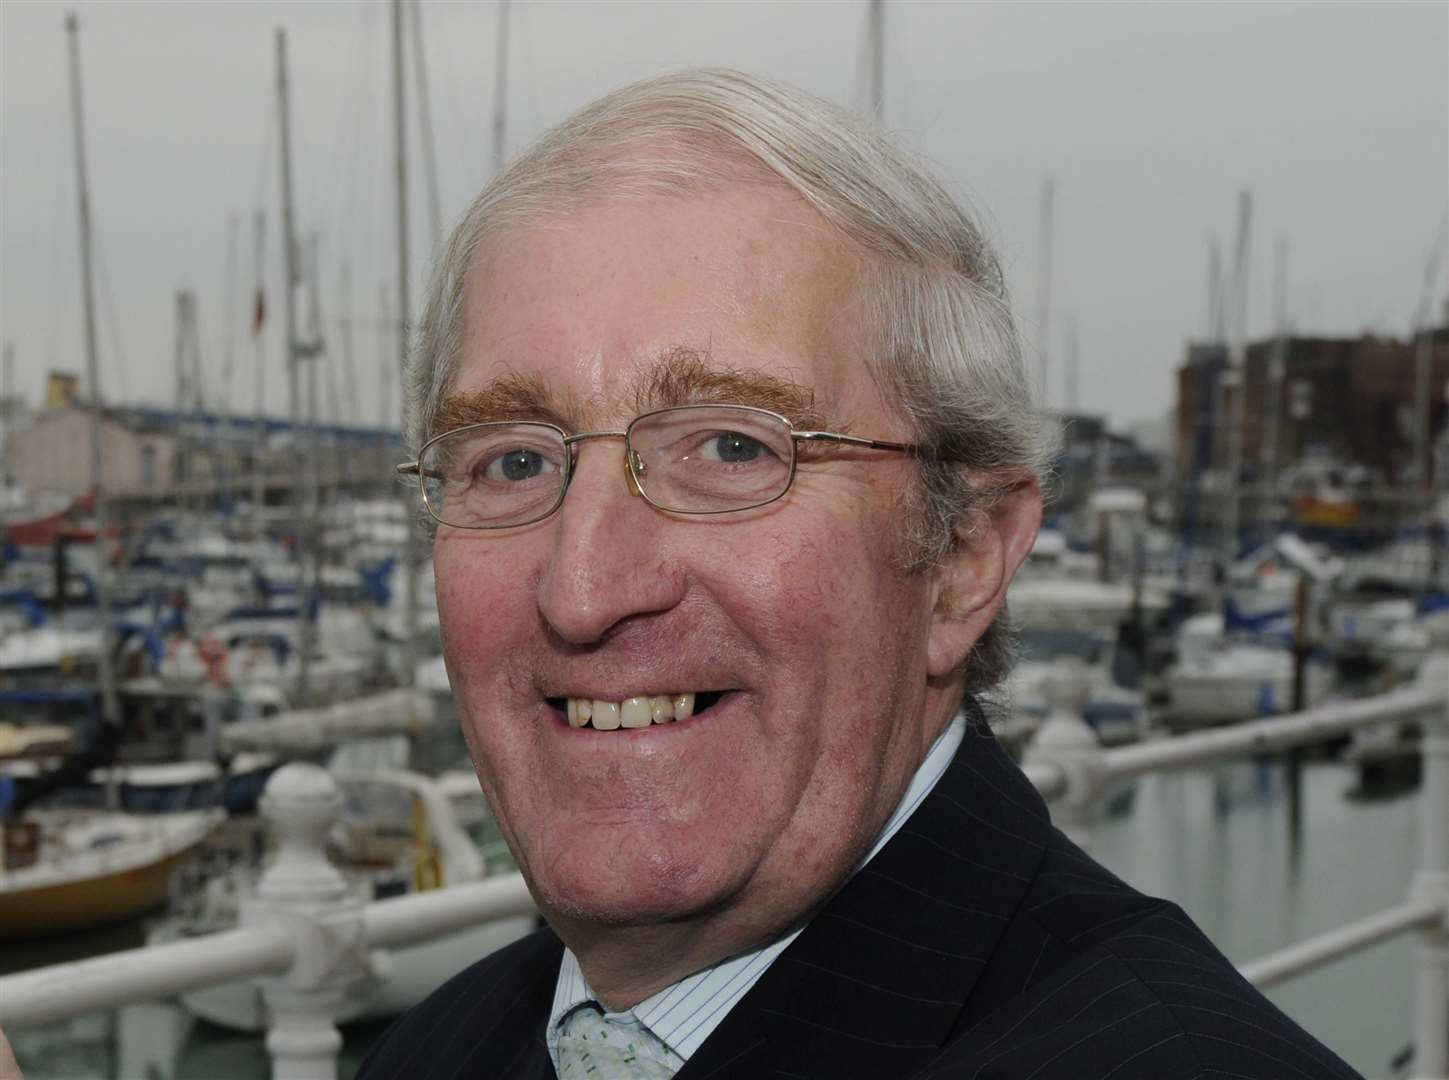 Ralph Hoult hopes to welcome a member of the royal family to celebrate the Ramsgate Royal Harbour 200th anniversary in 2021